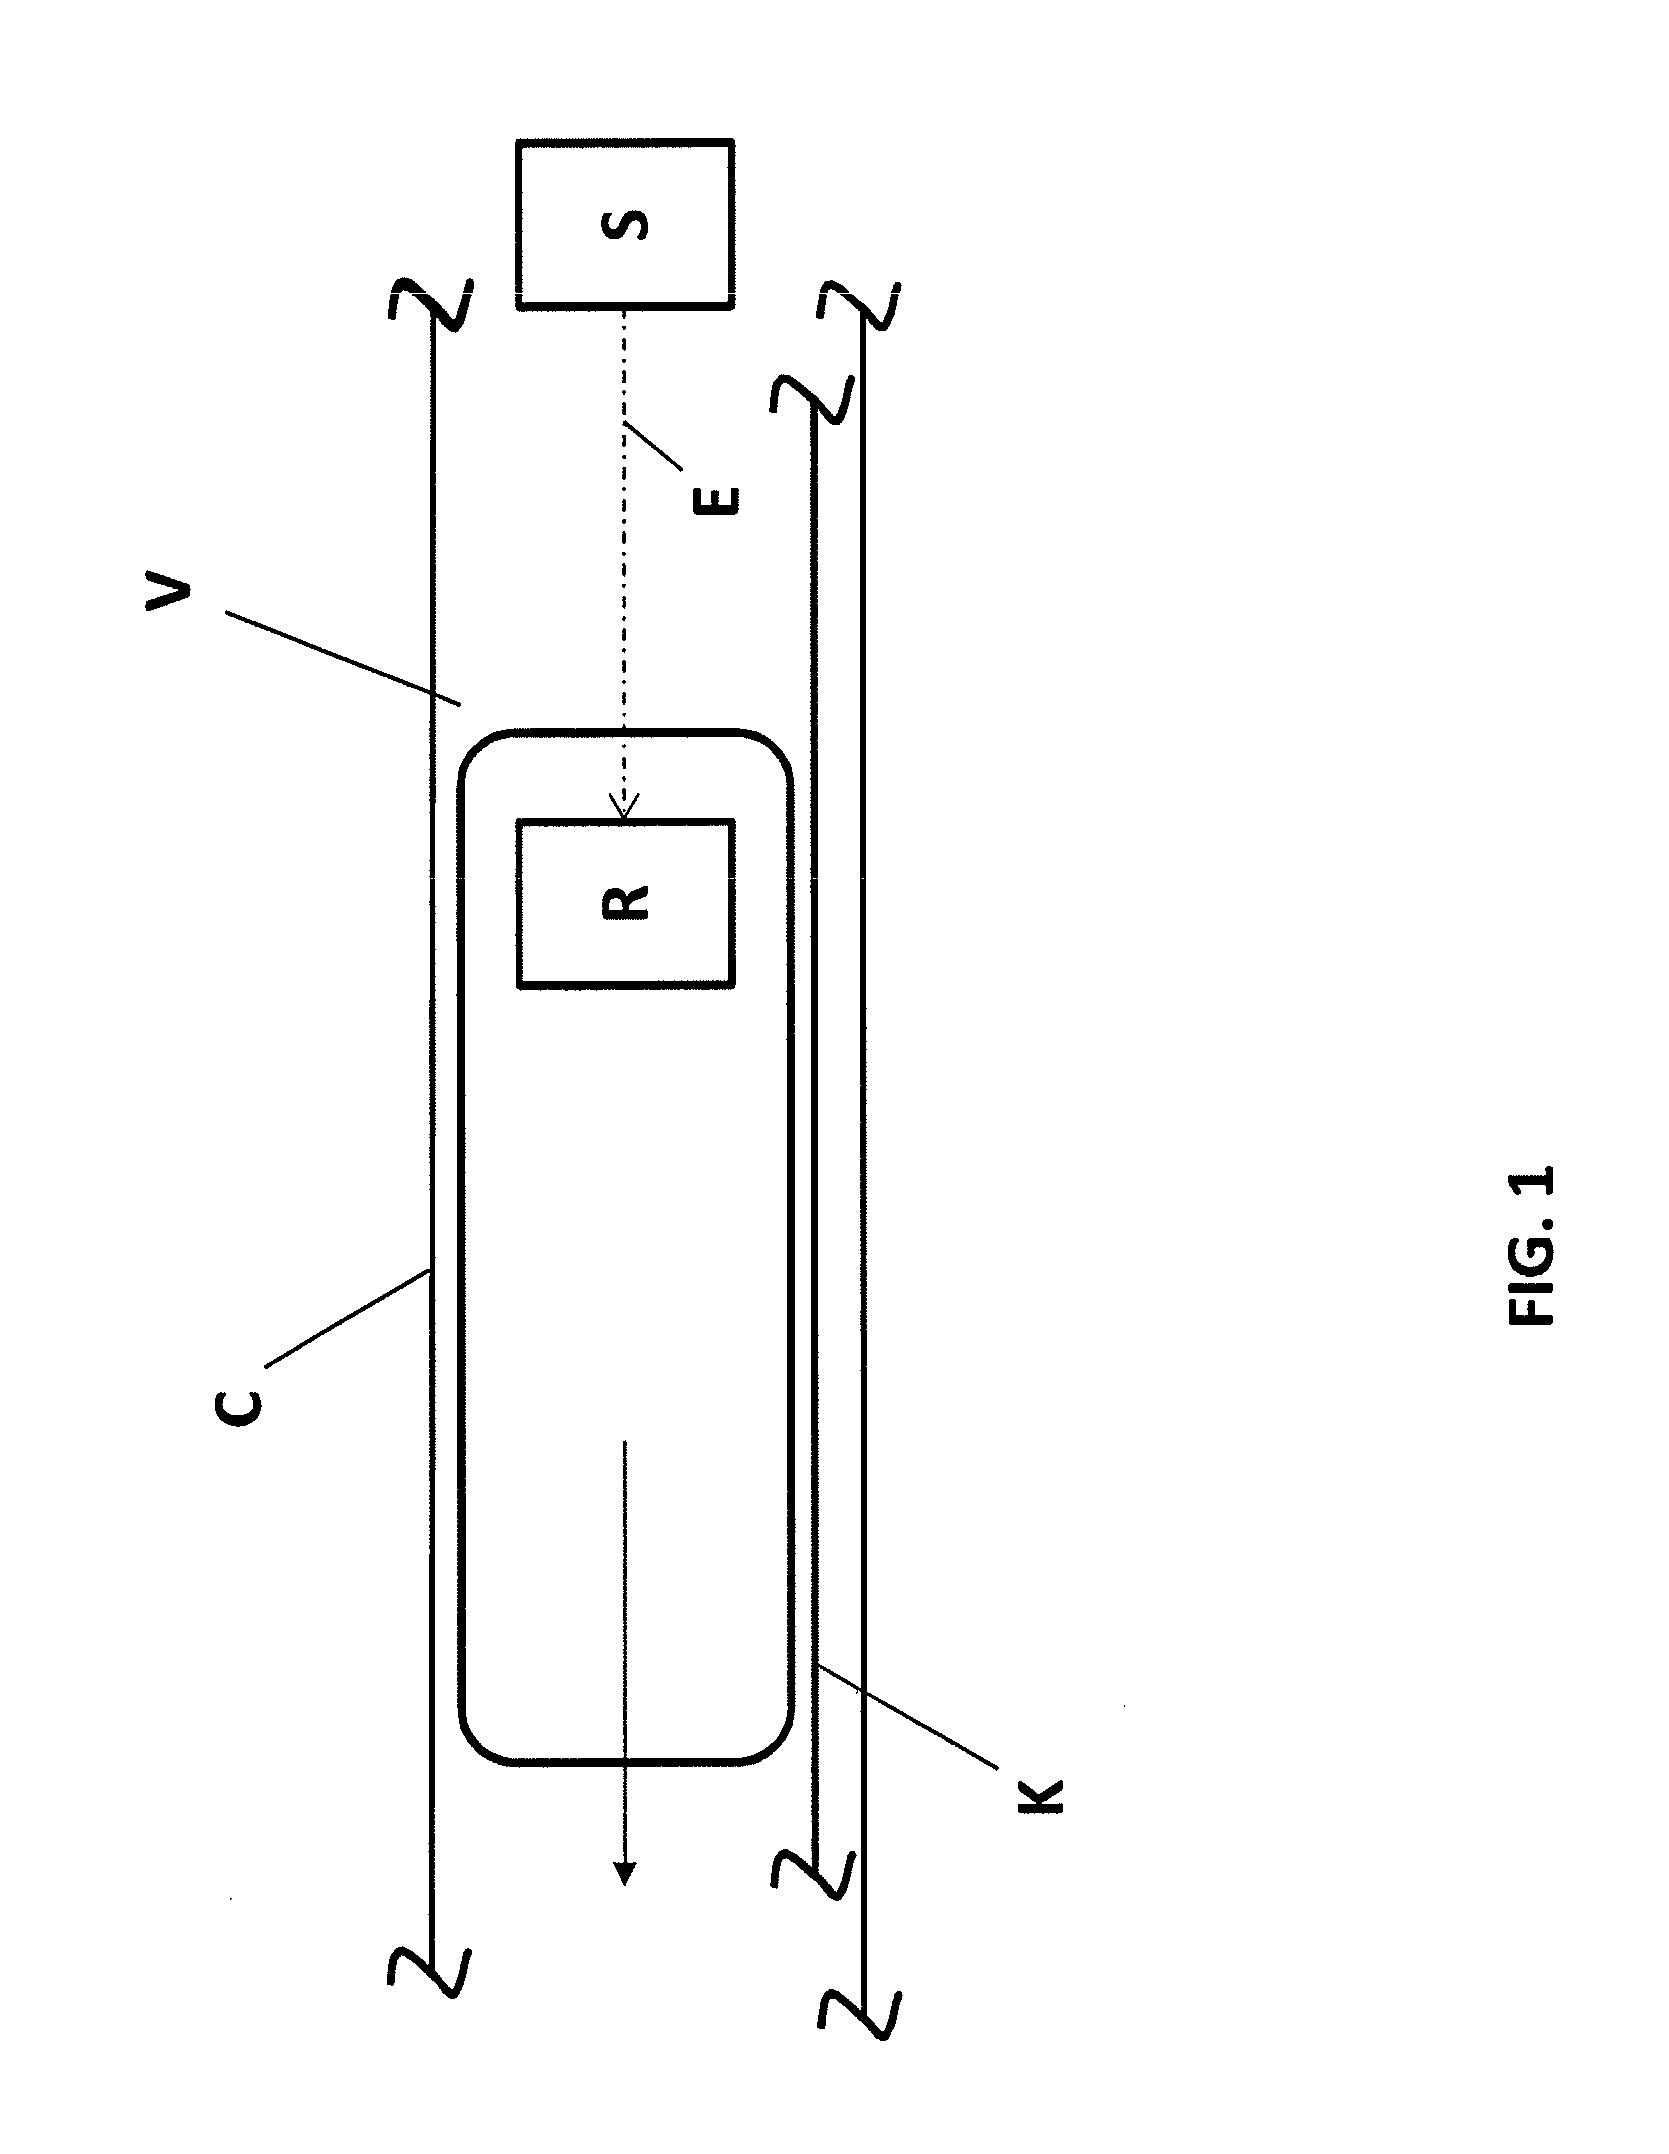 Power supply system and method for a movable vehicle within a structure